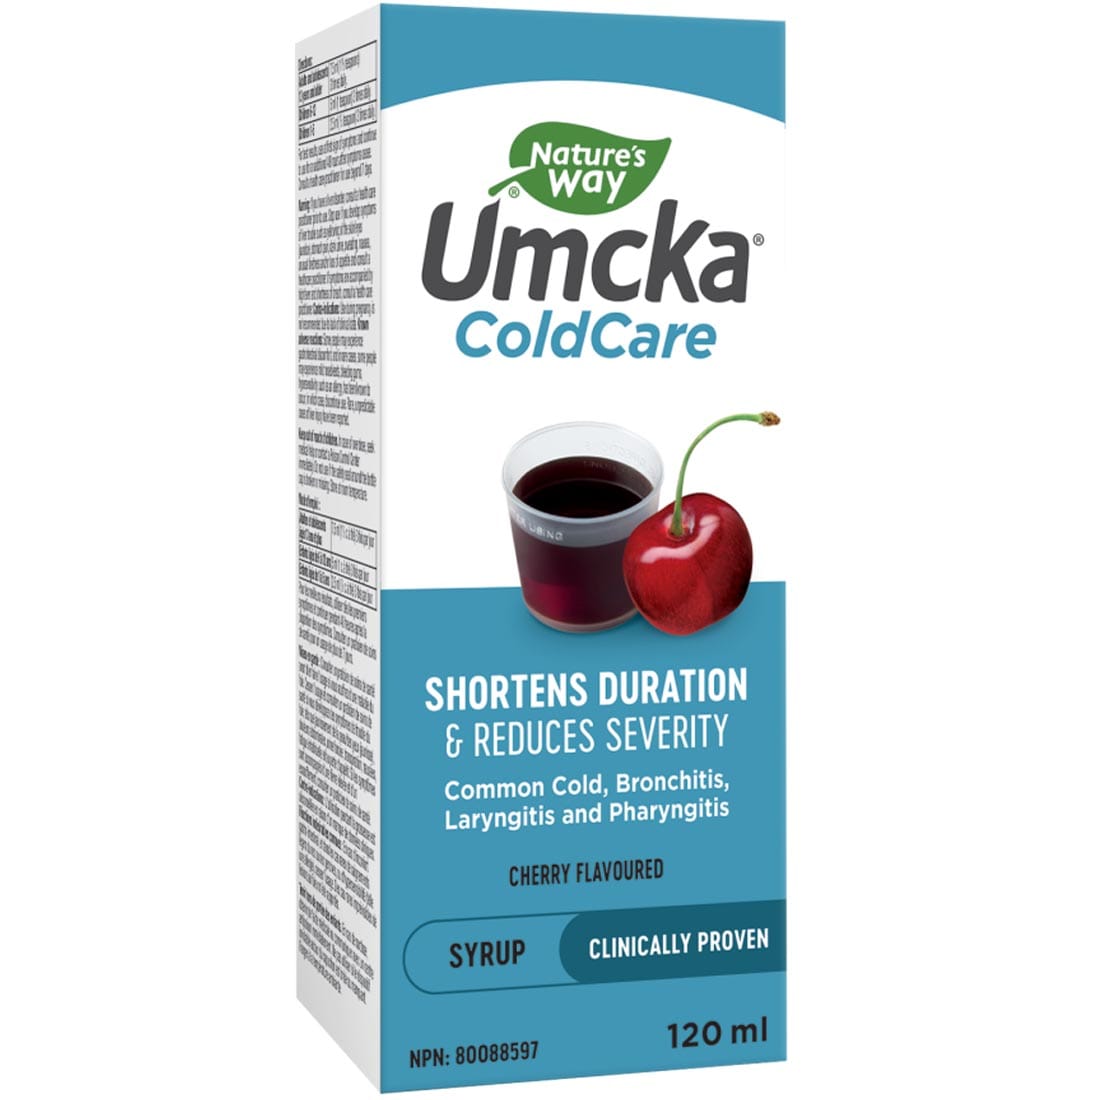 Nature's Way Umcka ColdCare Cough Syrup, 120ml